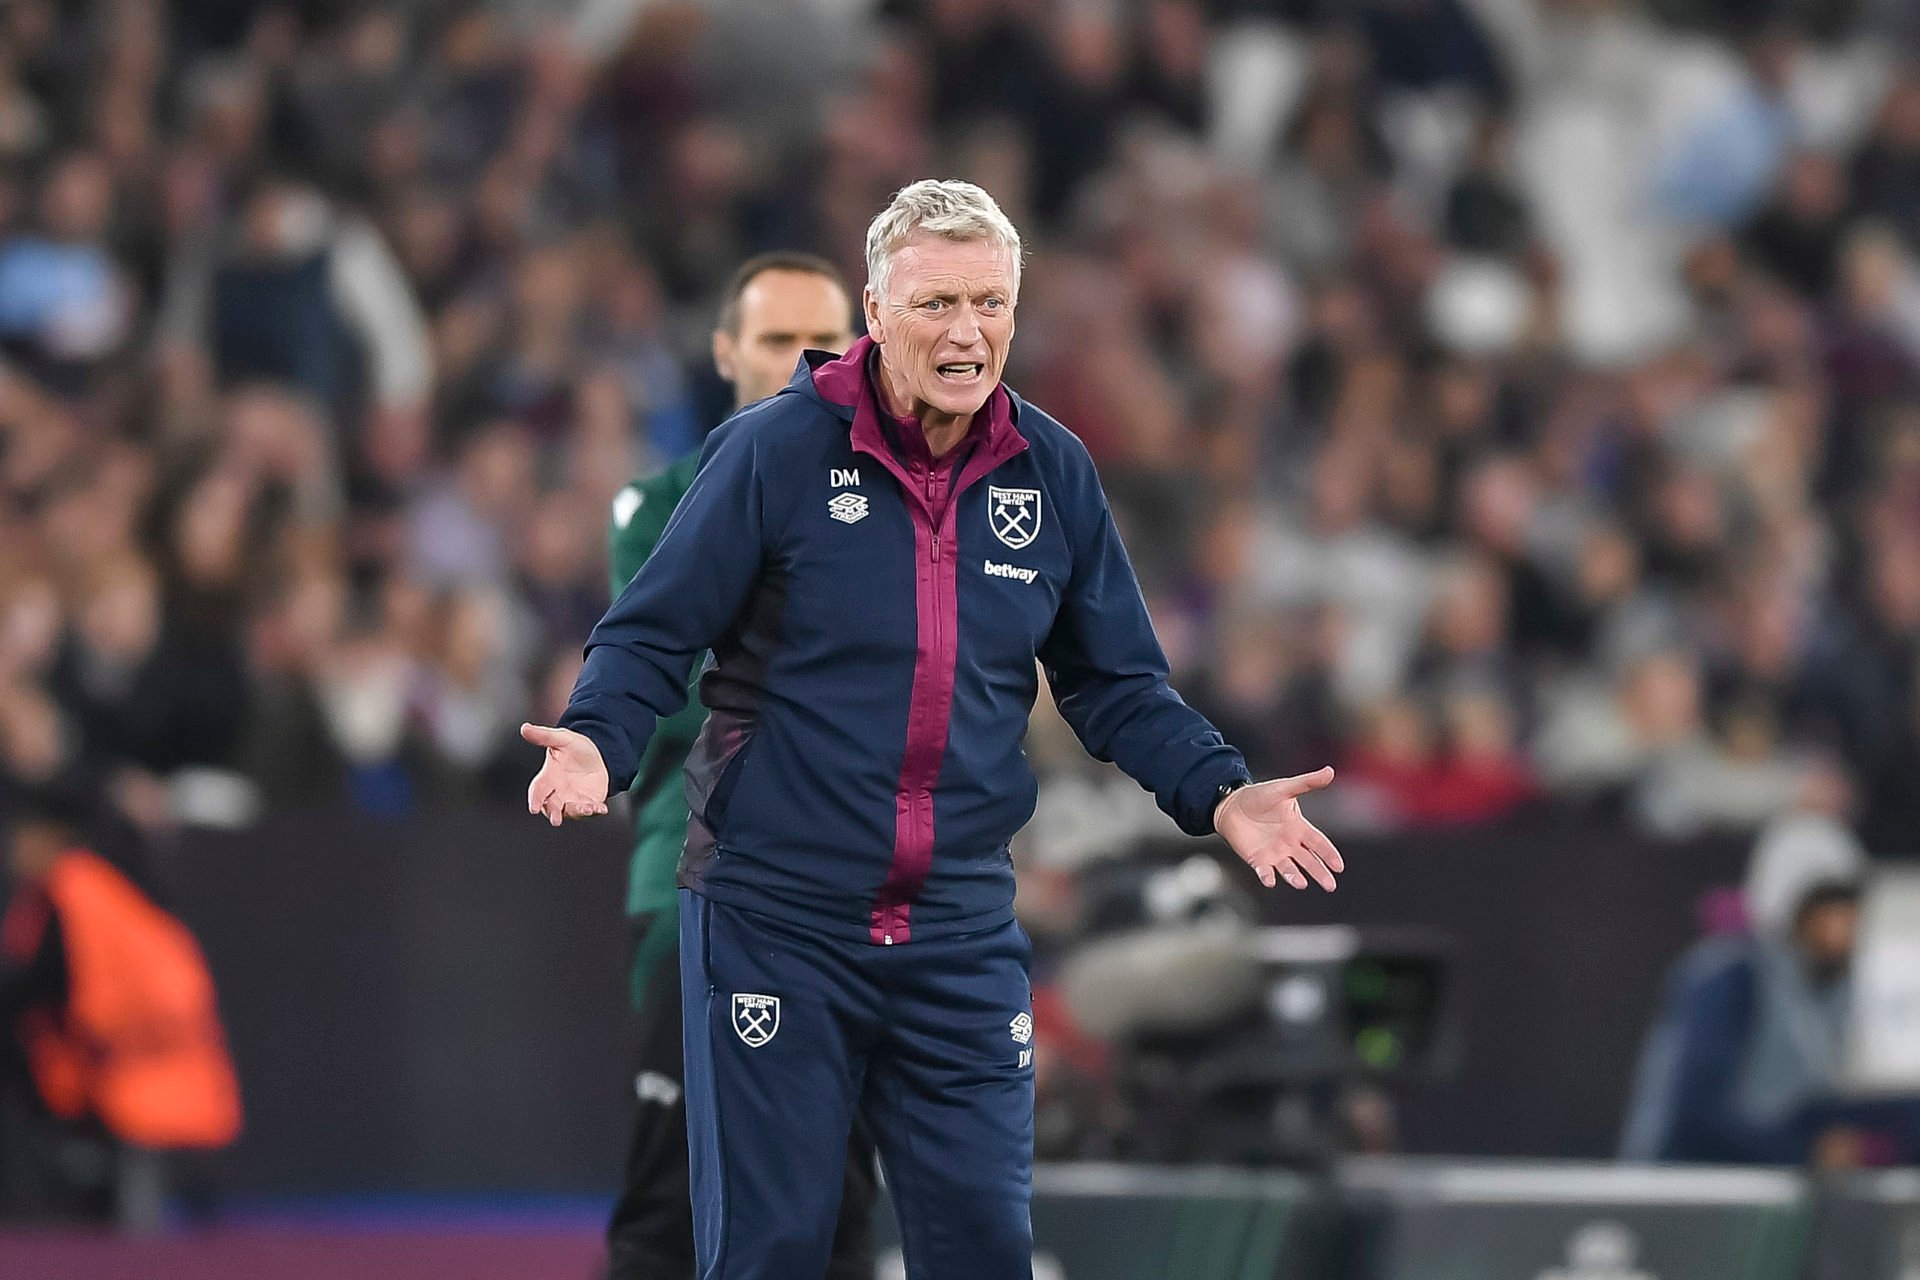 David Moyes obsession with West Ham man Tomas Soucek will ultimately cost him his job